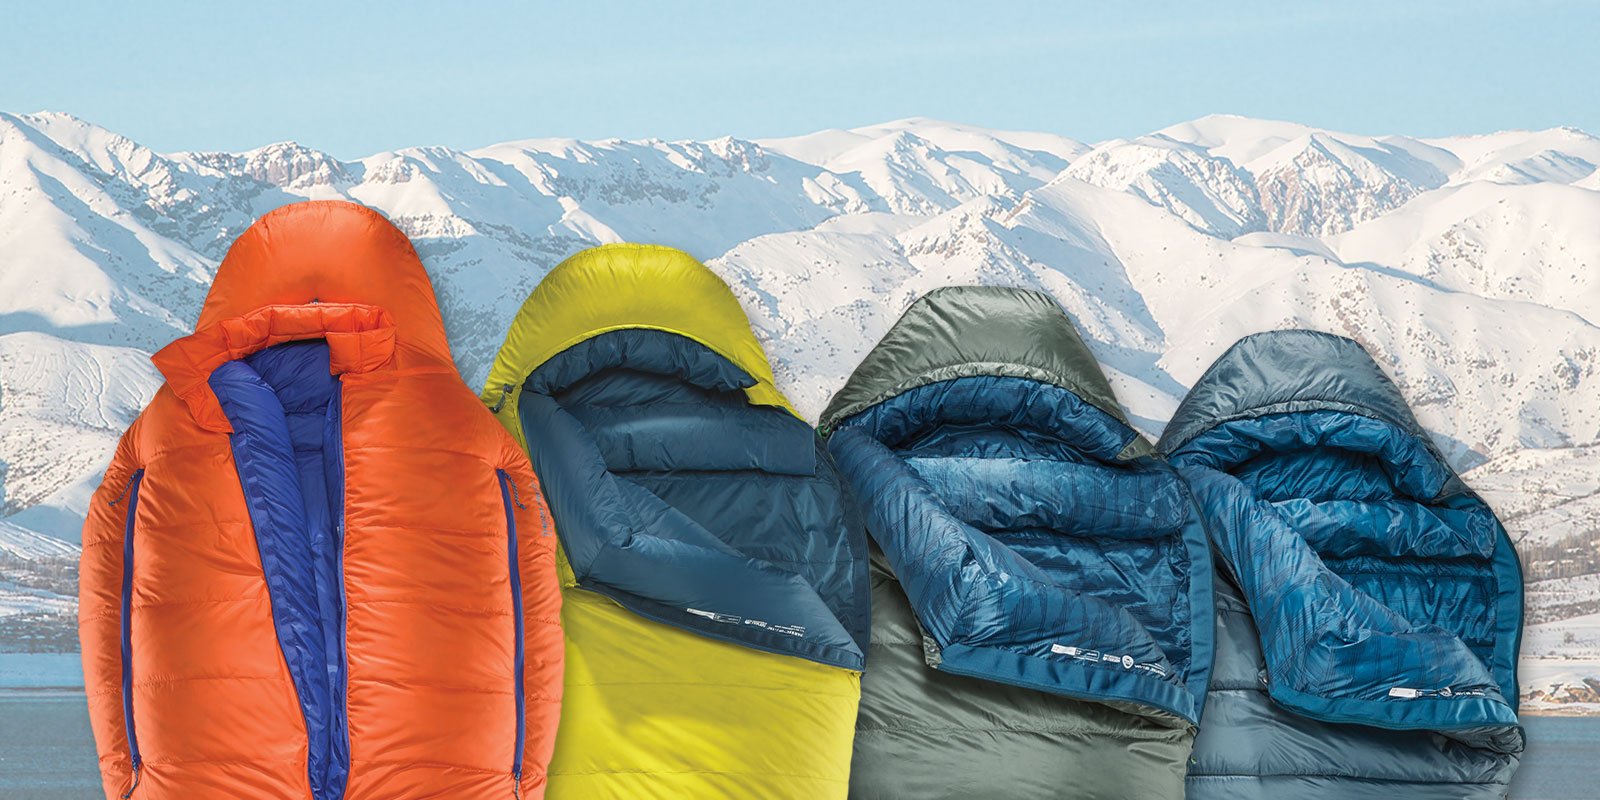 Cold Weather Sleeping Bags: What to Look For